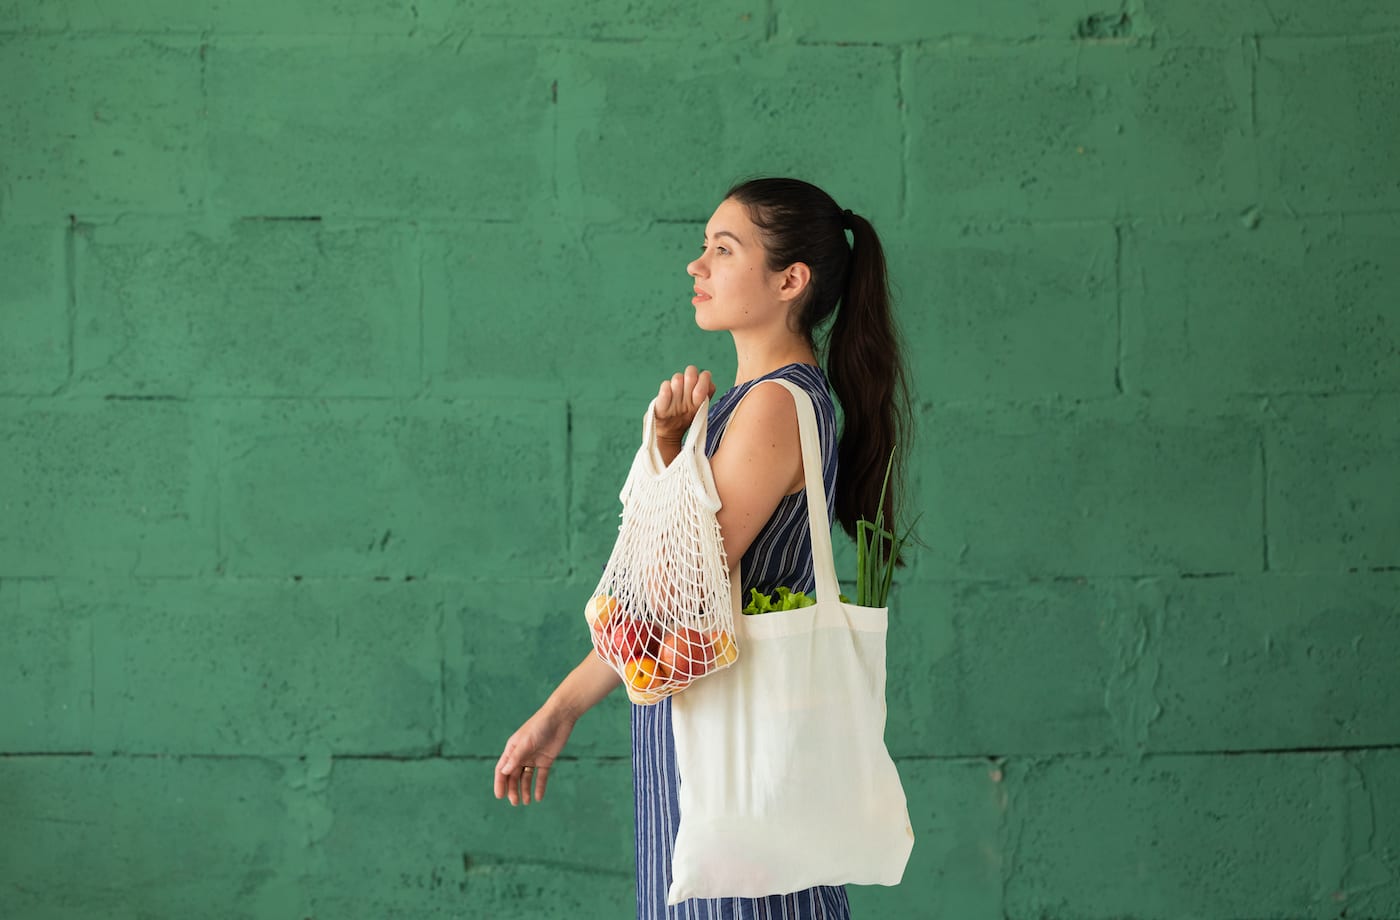 How to clean reusable tote bags, because you put your groceries in there!